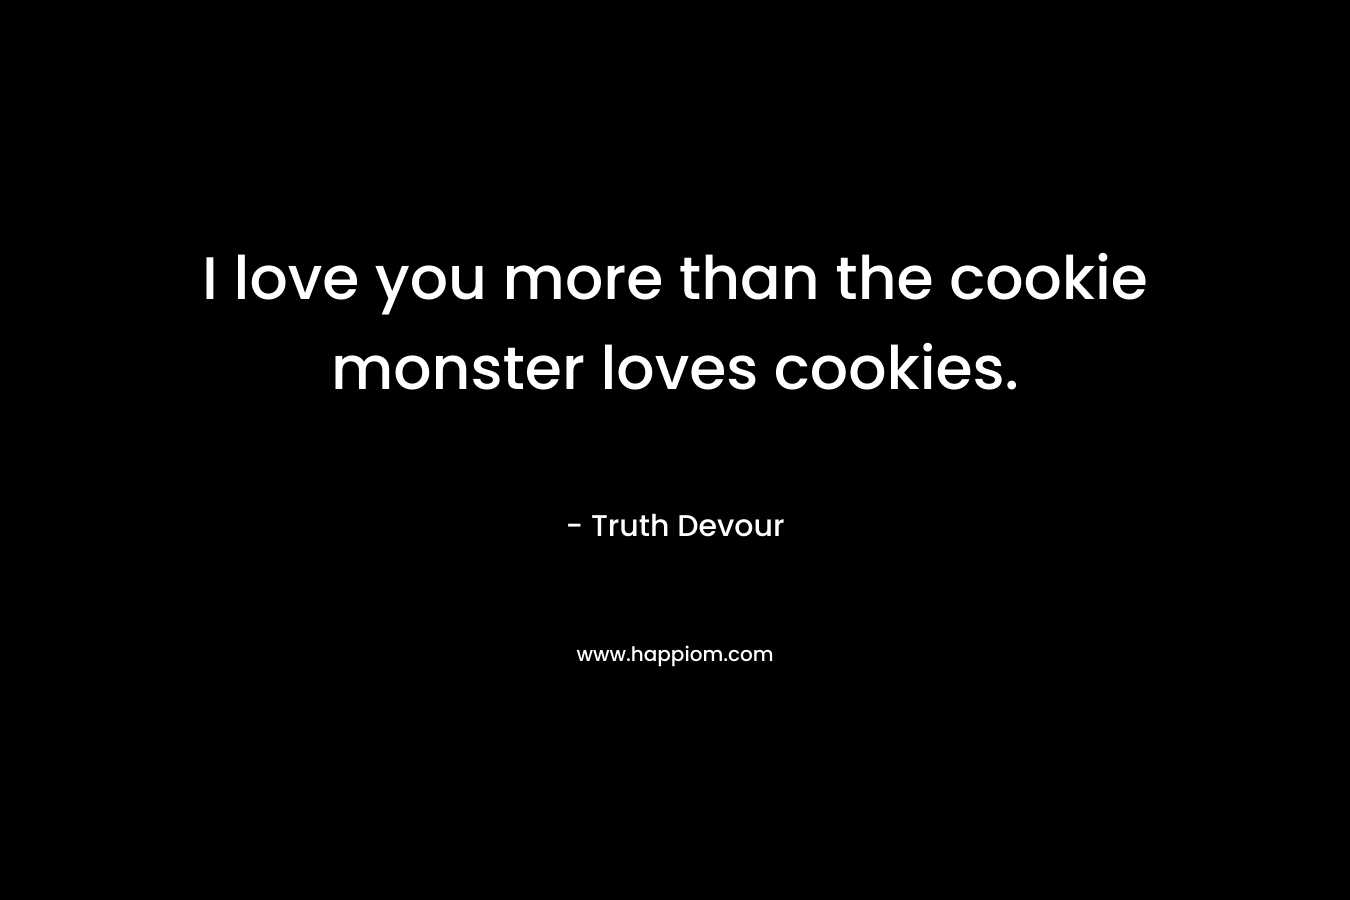 I love you more than the cookie monster loves cookies.